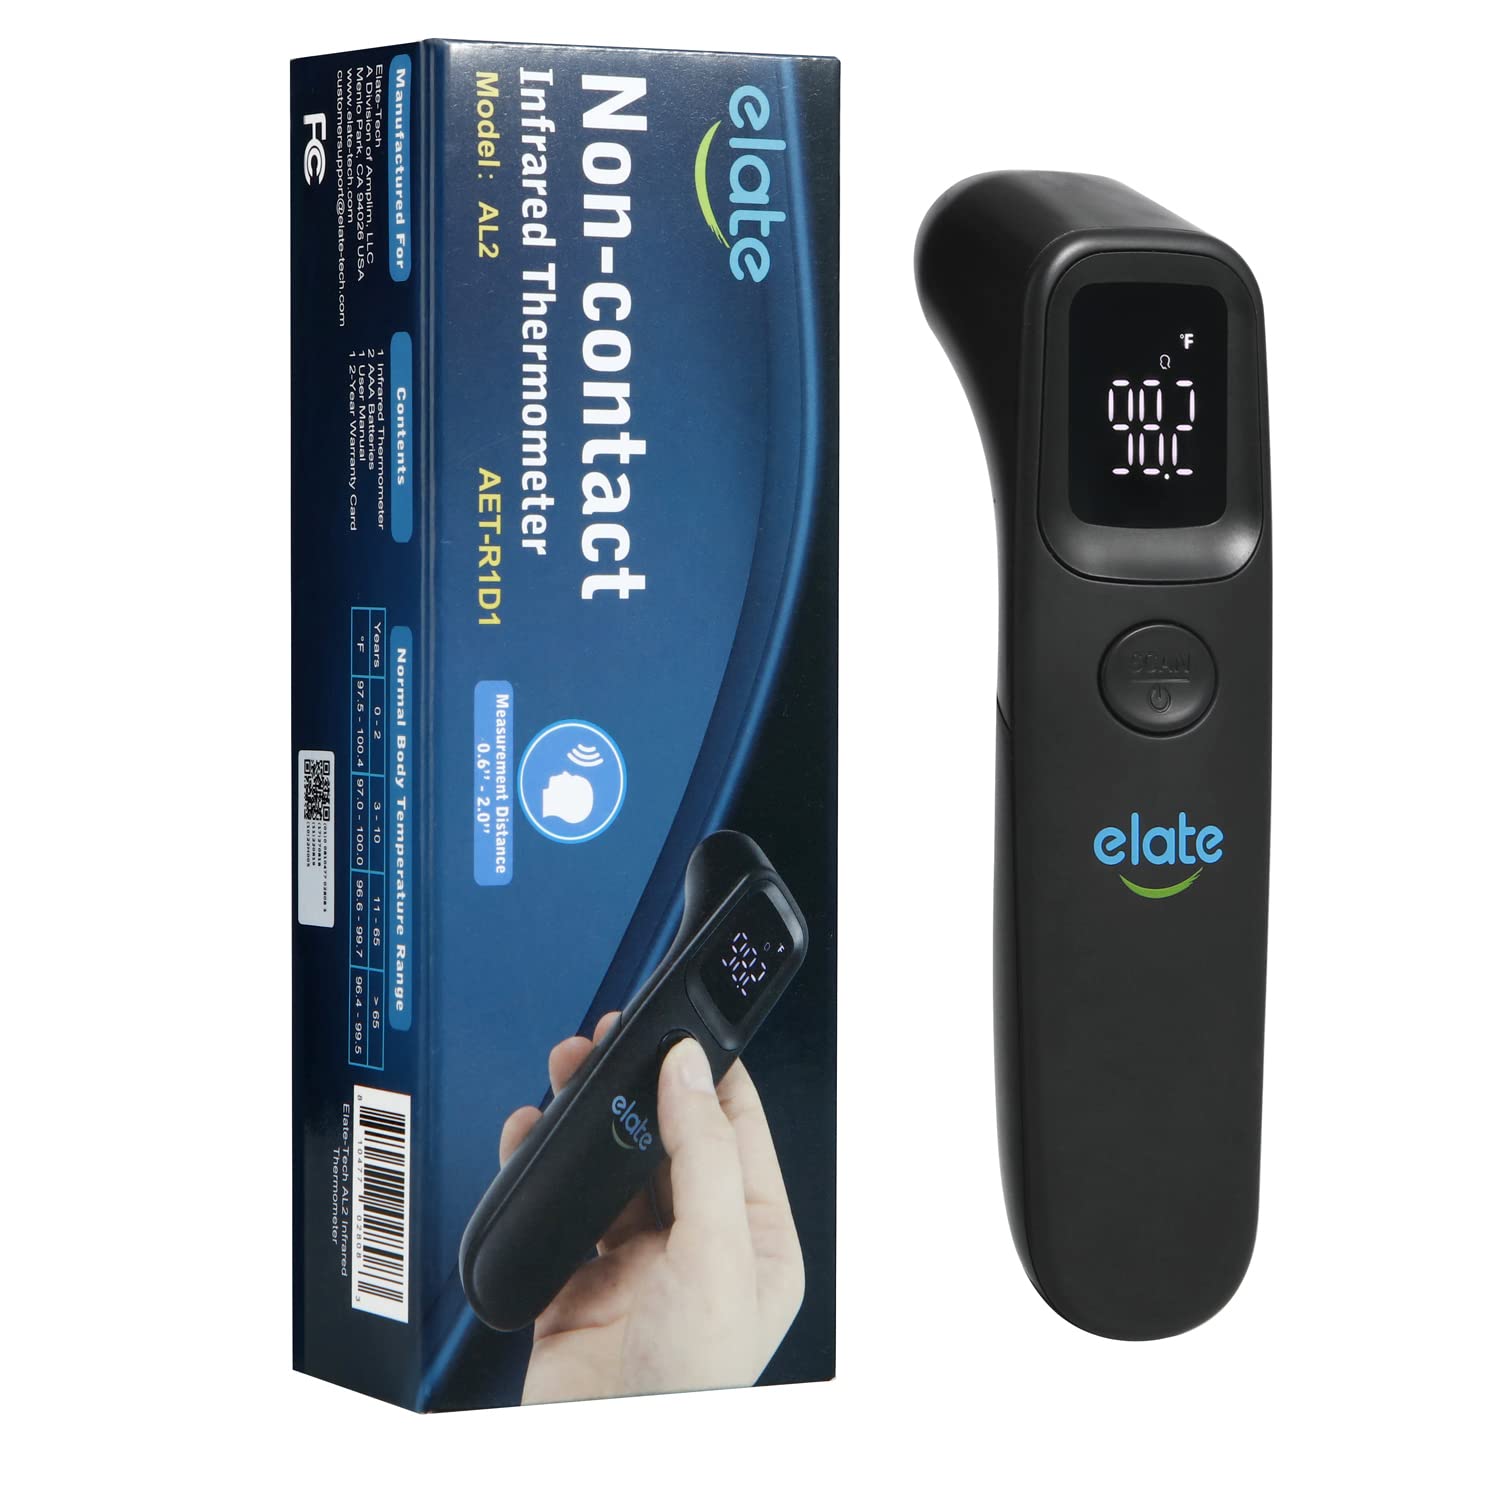 Thermometer for Adults FSA Eligible High Accuracy No-Touch Digital